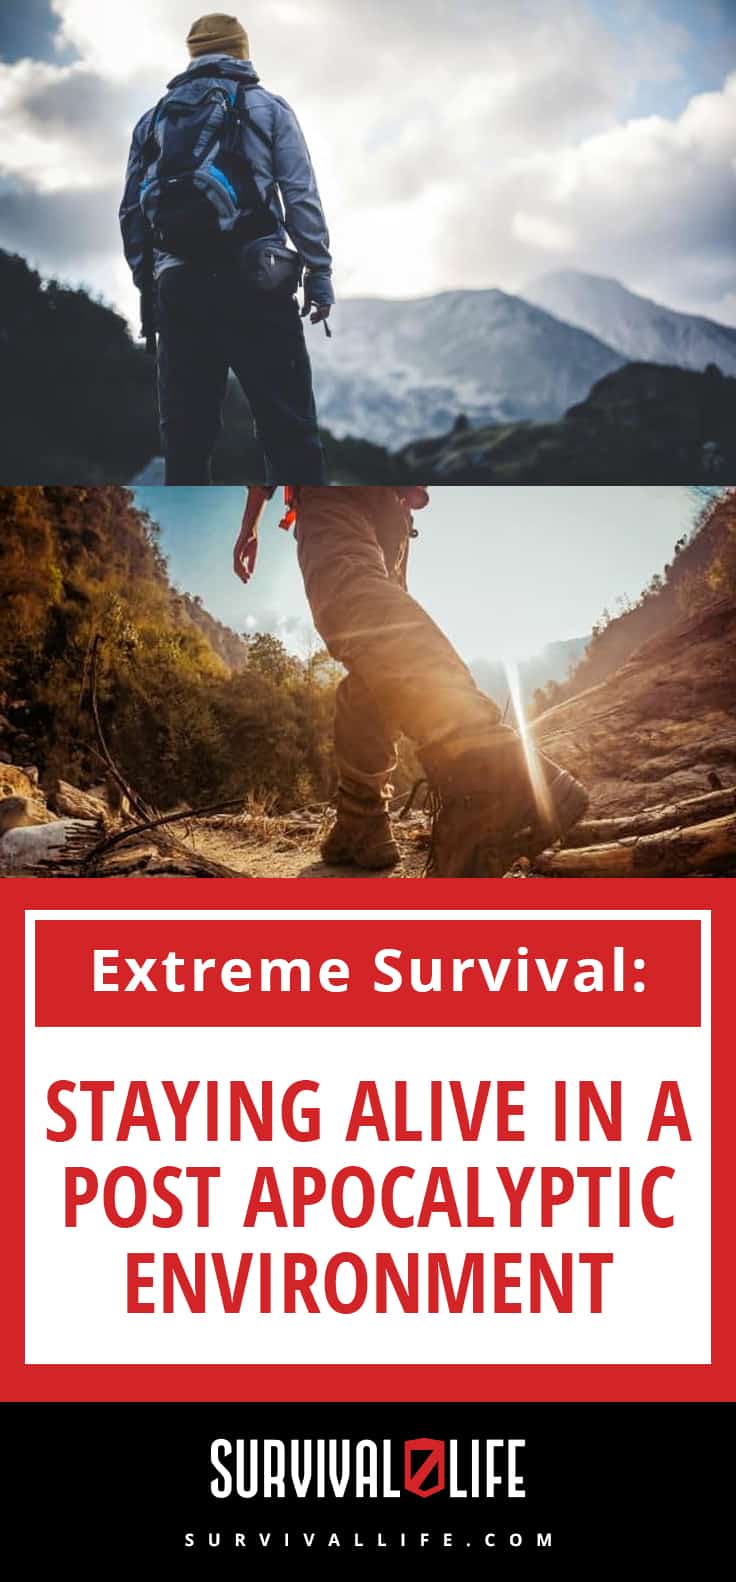 Extreme Survival: Staying Alive In A Post Apocalyptic Environment